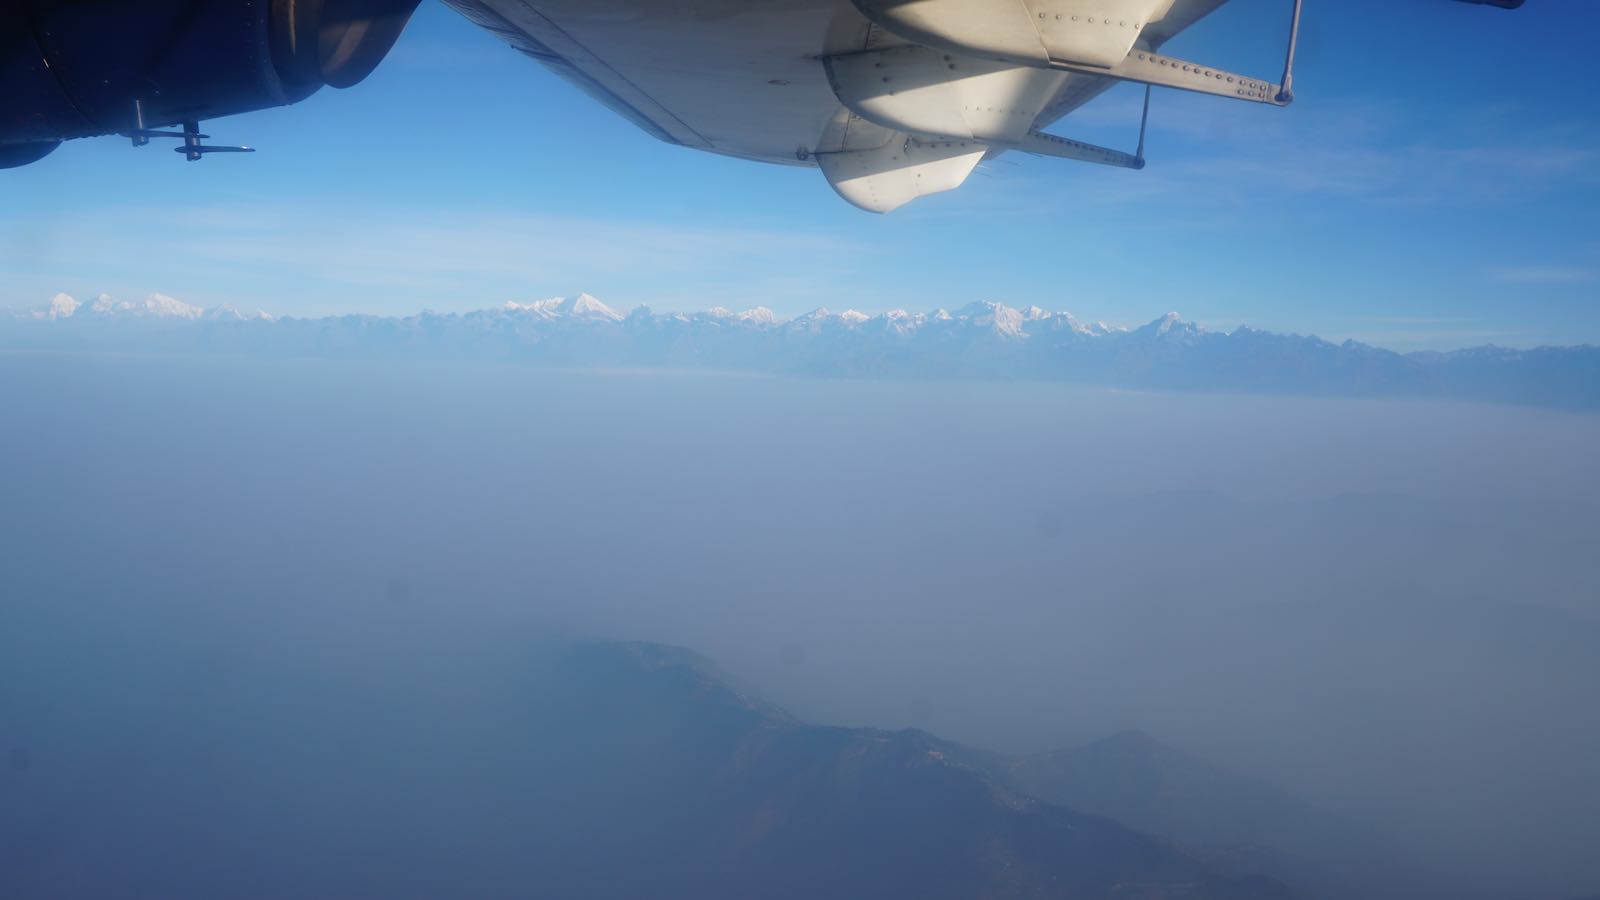 We flew out! And it was a perfectly clear day (until we got near Kathmandu) with an amazing view of the post prominent Himalayan peaks